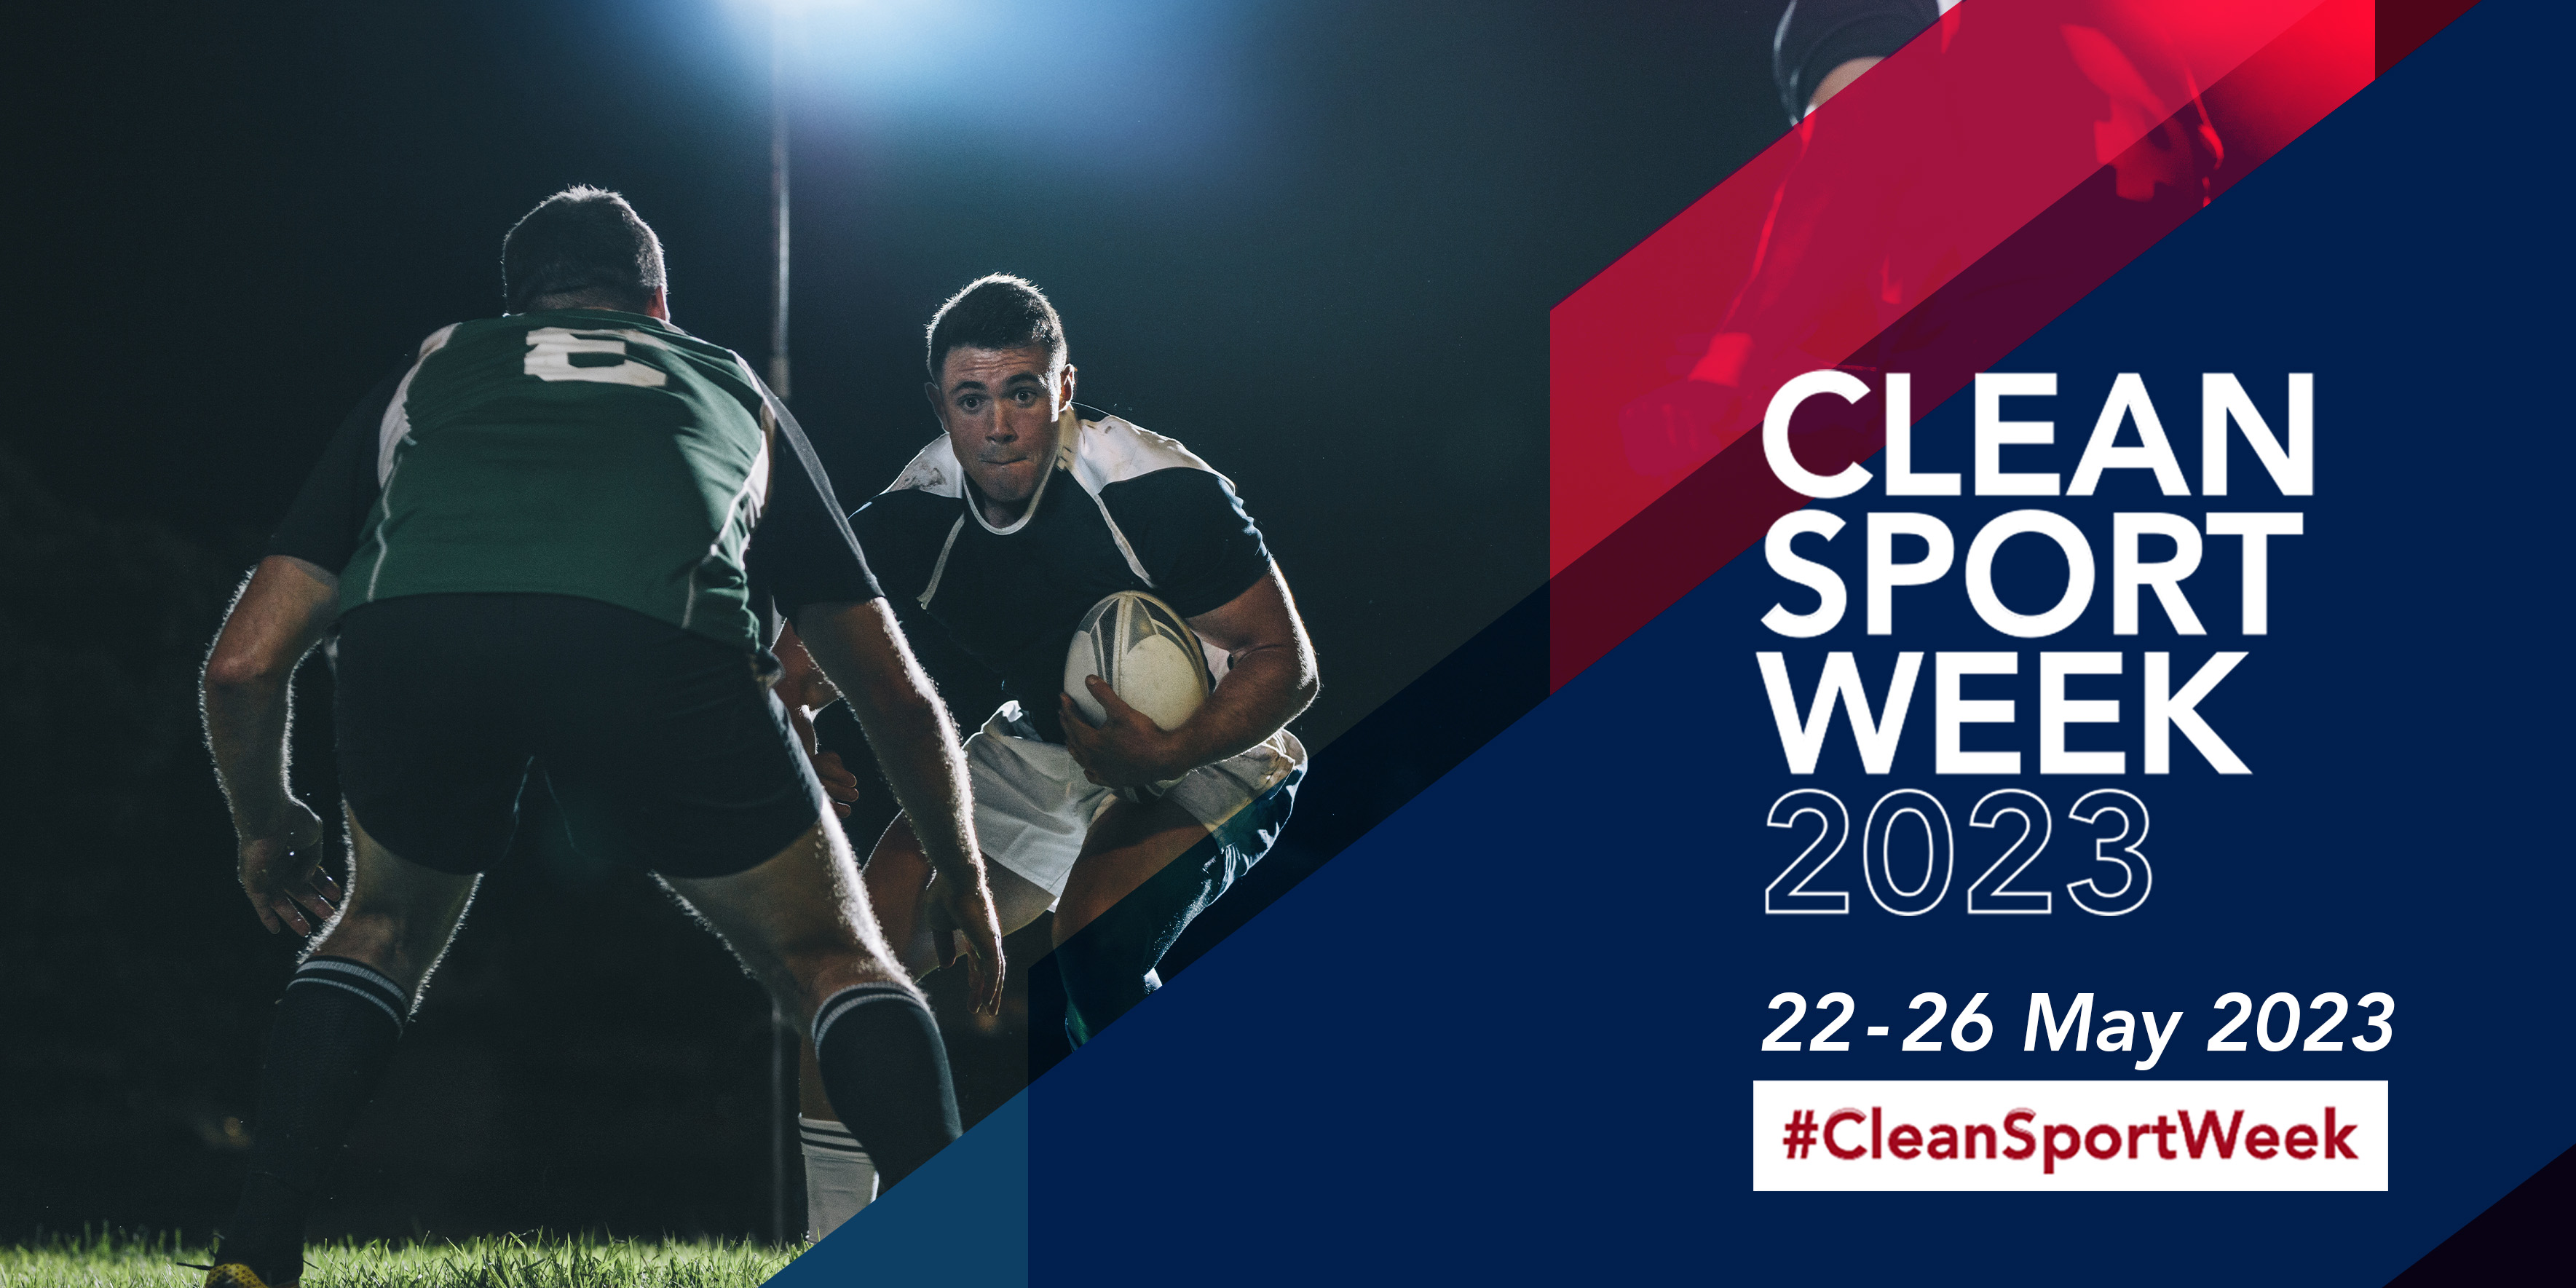 An image of two rugby players with text reading; Clean Sport Week 2023. 22-26 May 2023. #CleanSportWeek